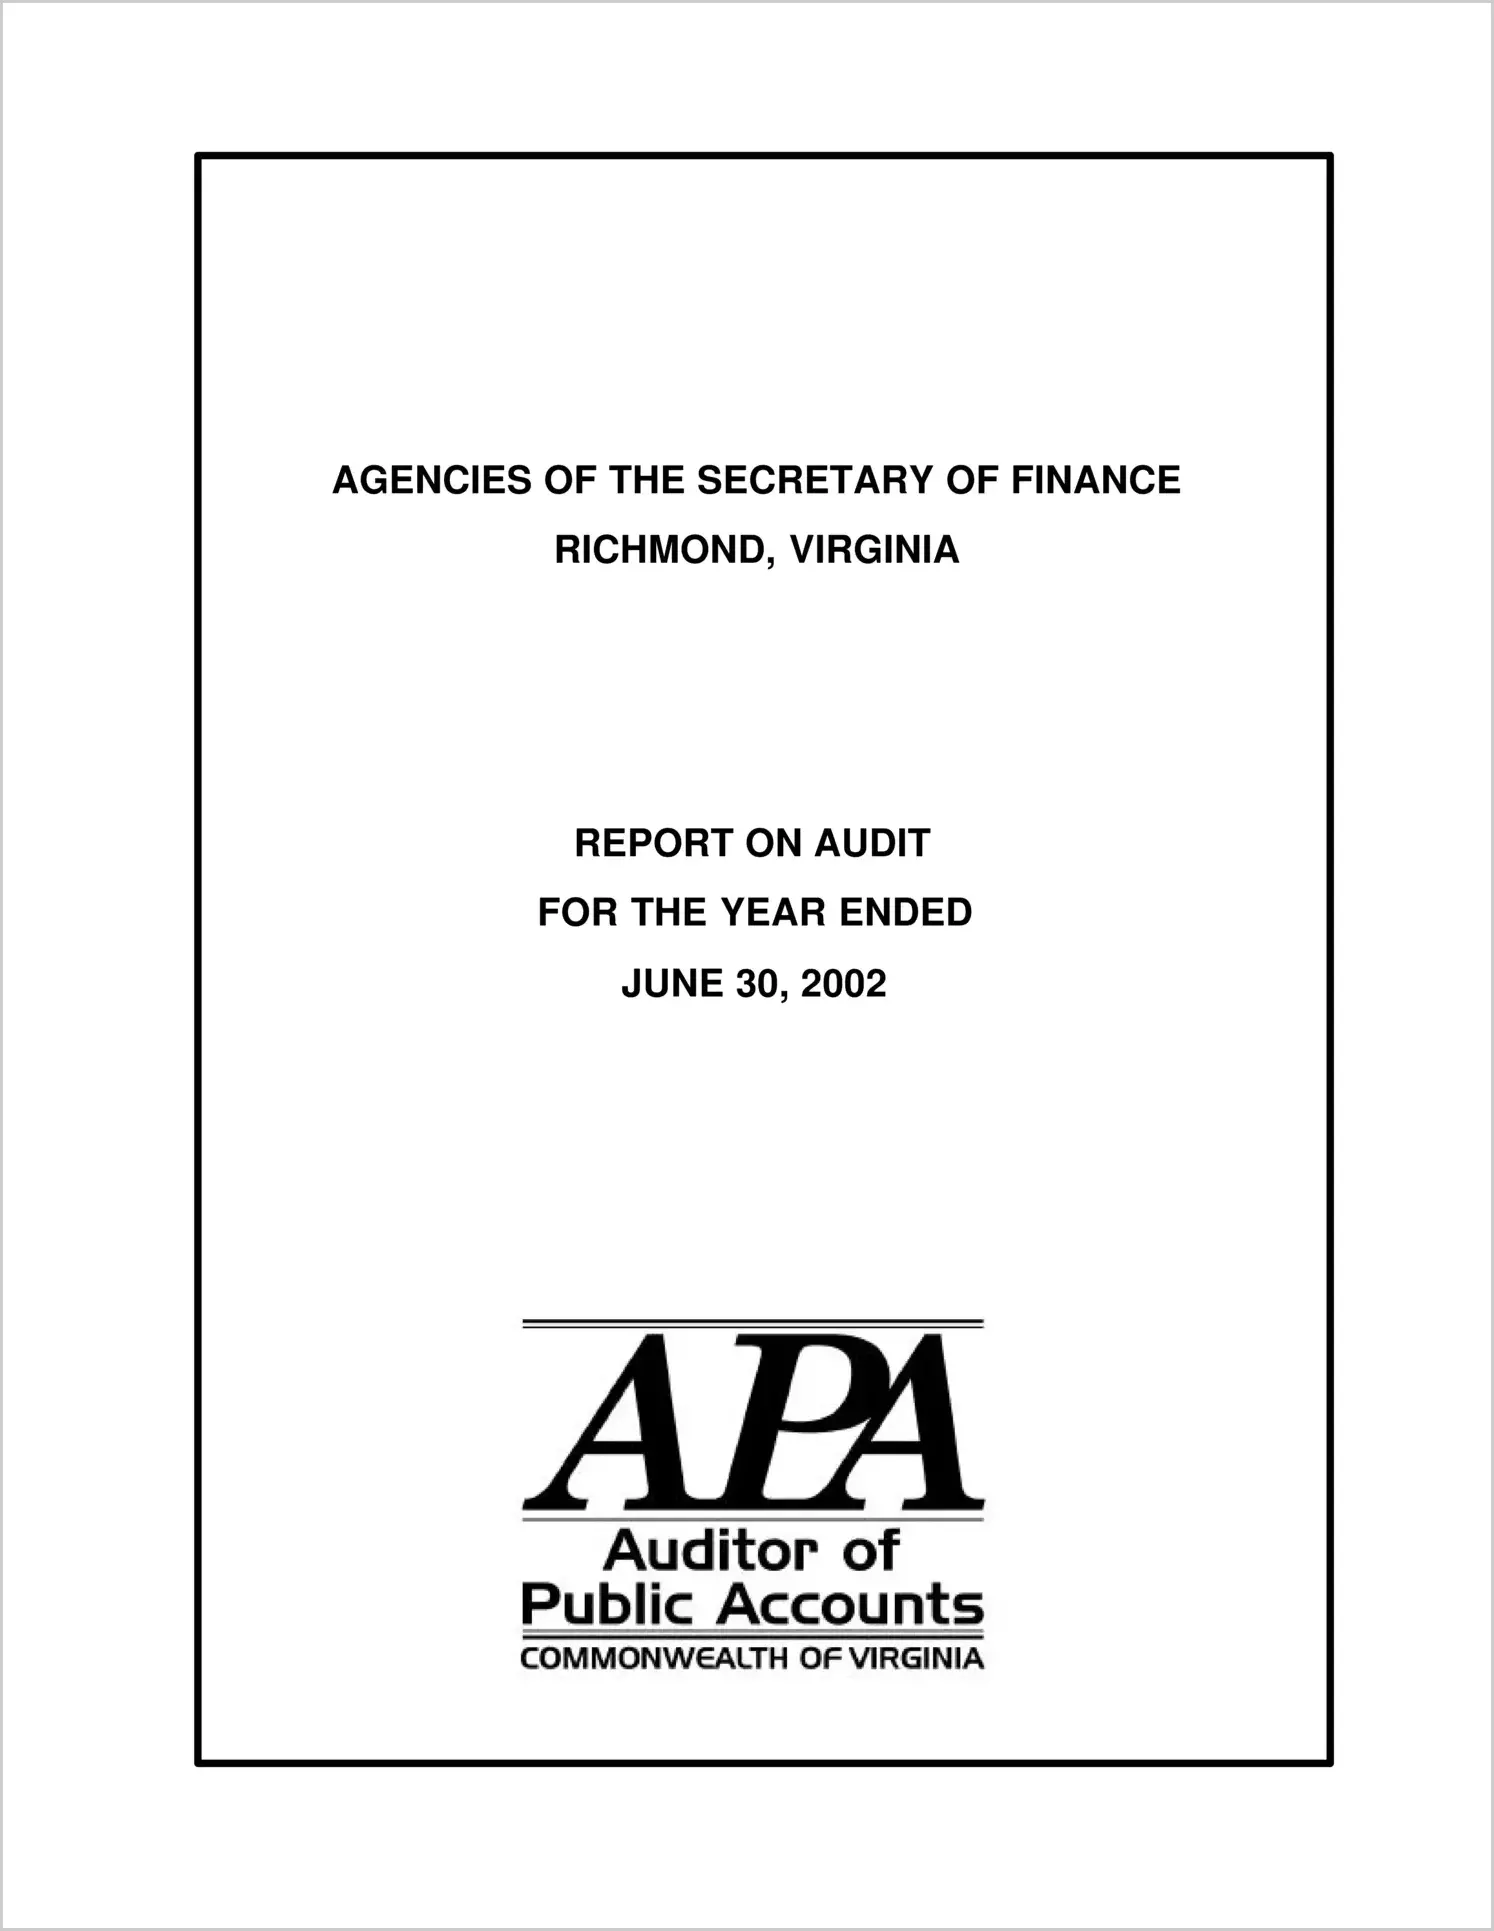 Agencies of the Secretary of Finance for the year ended June 30, 2002